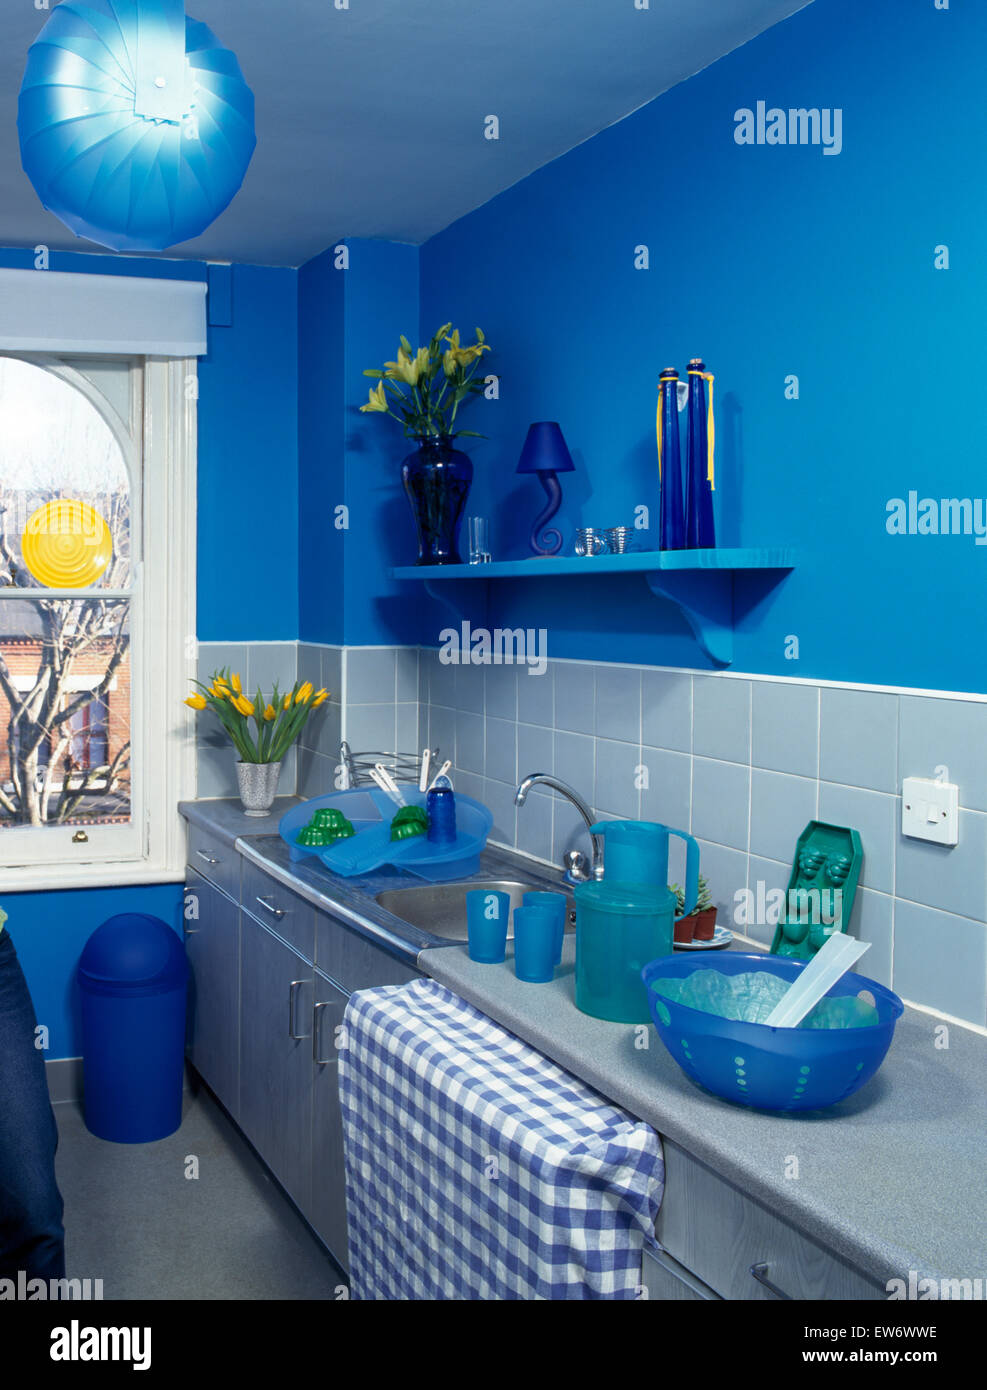 Bright blue nineties economy style kitchen with silver painted units Stock Photo